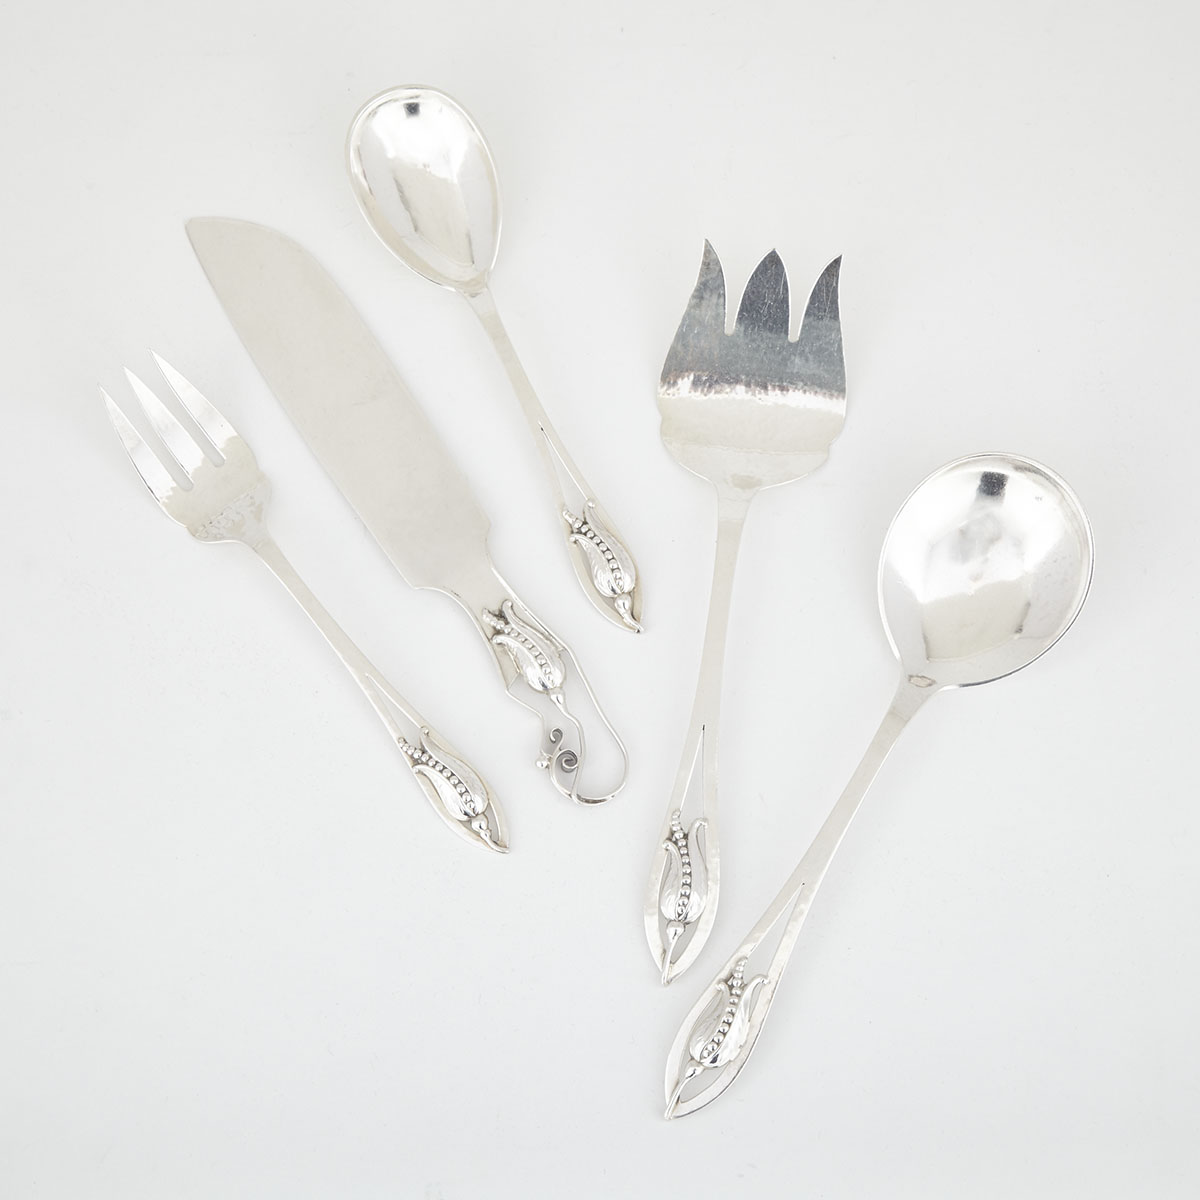 Canadian Silver Blossom Pattern Serving Pieces, Carl Poul Petersen, Montreal, Que., mid-20th century